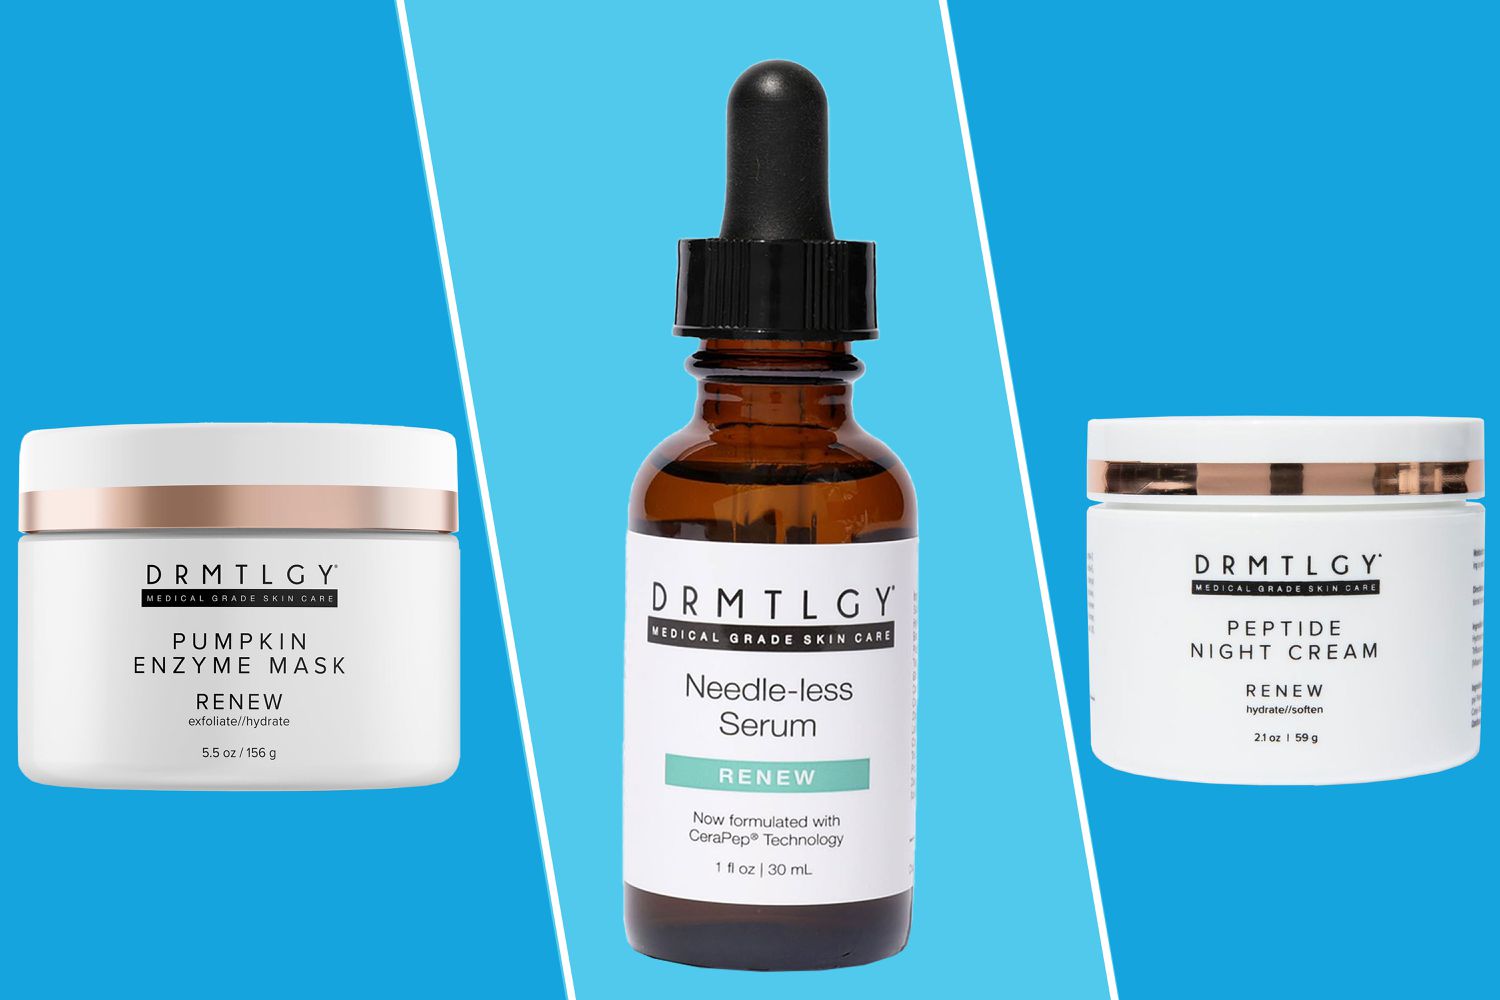 My 52-Year-Old Mom Swears by Drmtlgy Skincare for Her Healthy Skin [Video]